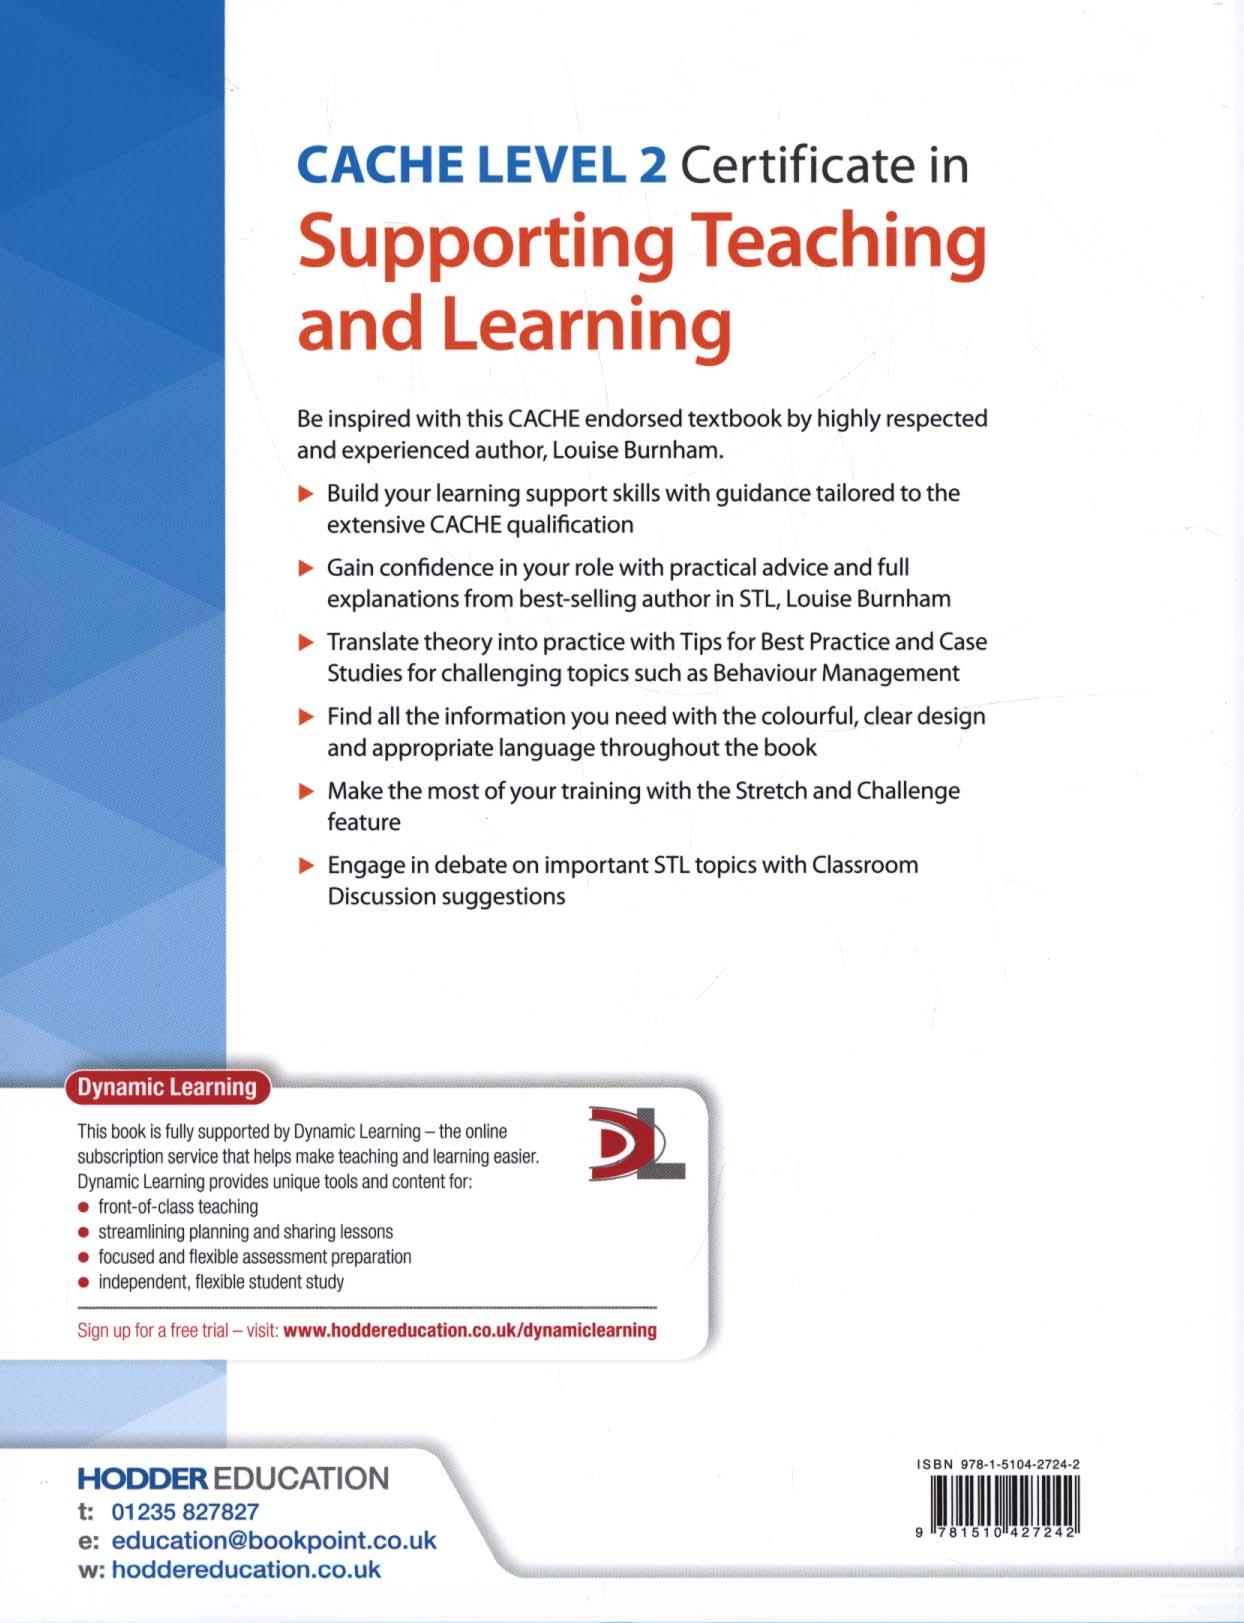 CACHE Level 2 Certificate in Supporting Teaching and Learnin